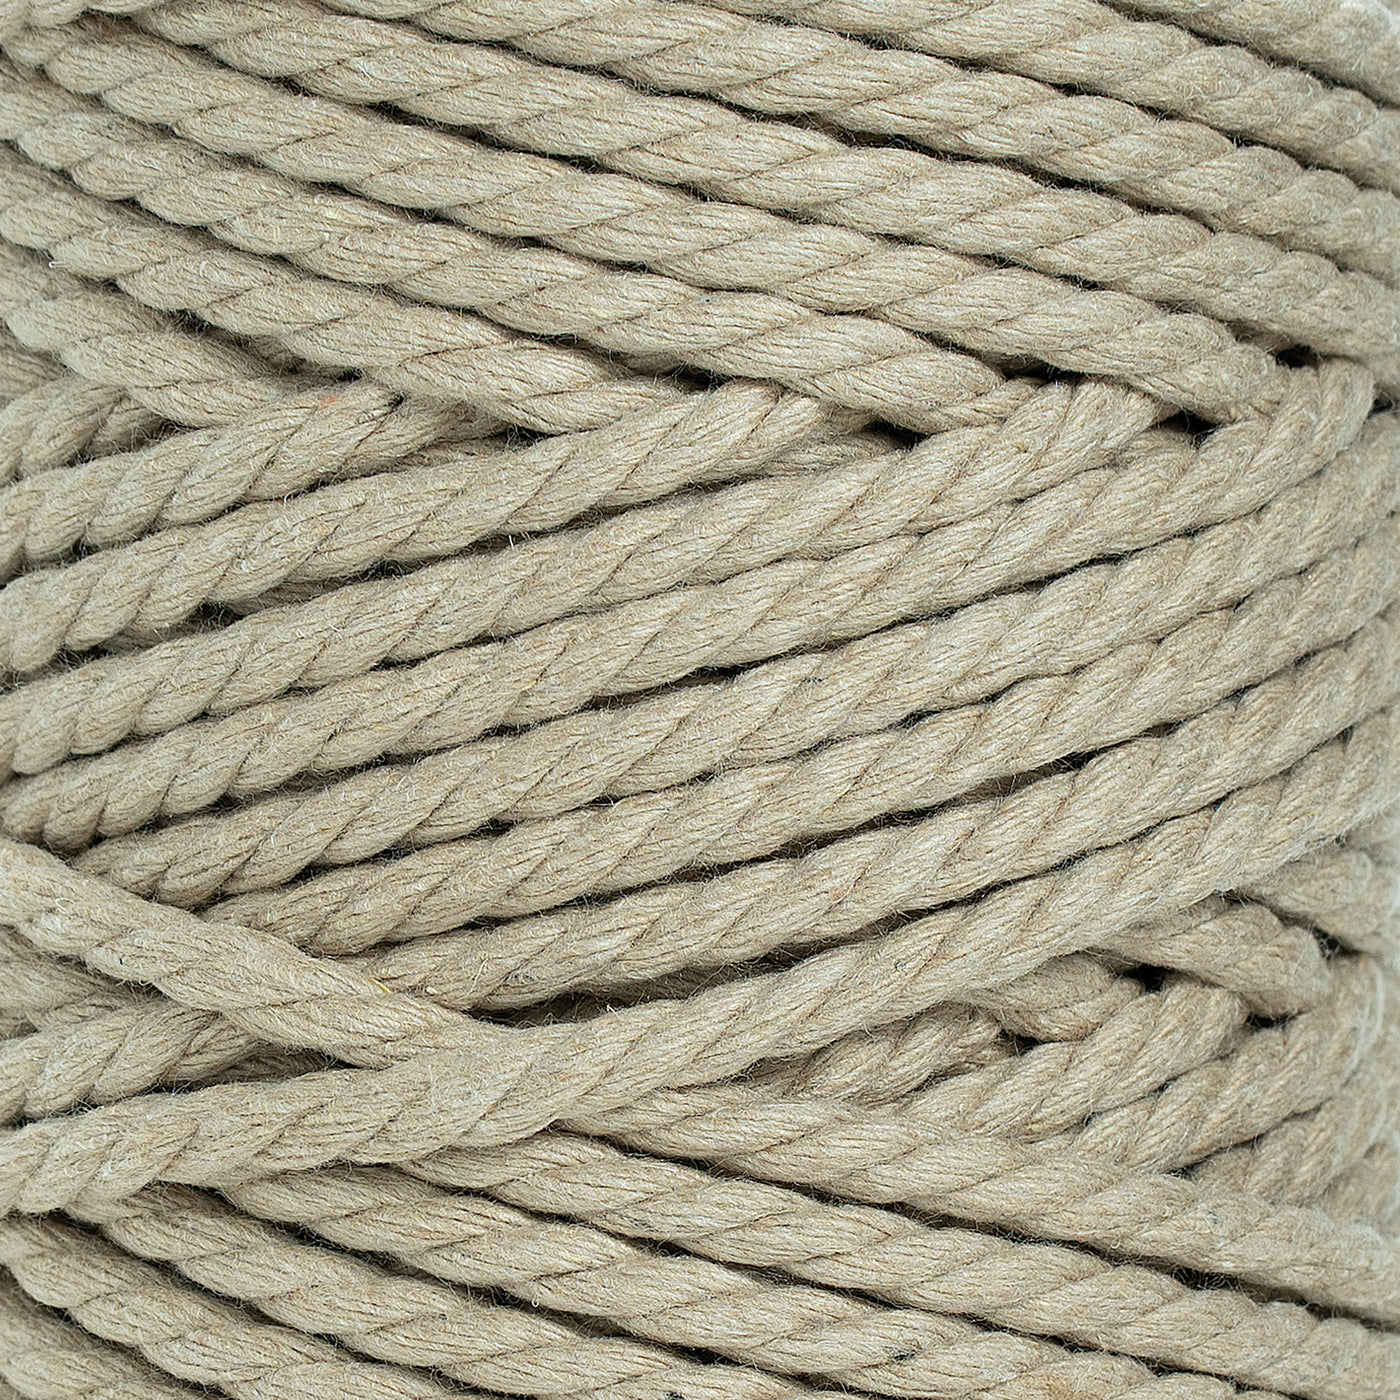 COTTON ROPE ZERO WASTE 5 MM - 3 PLY - SAND COLOR